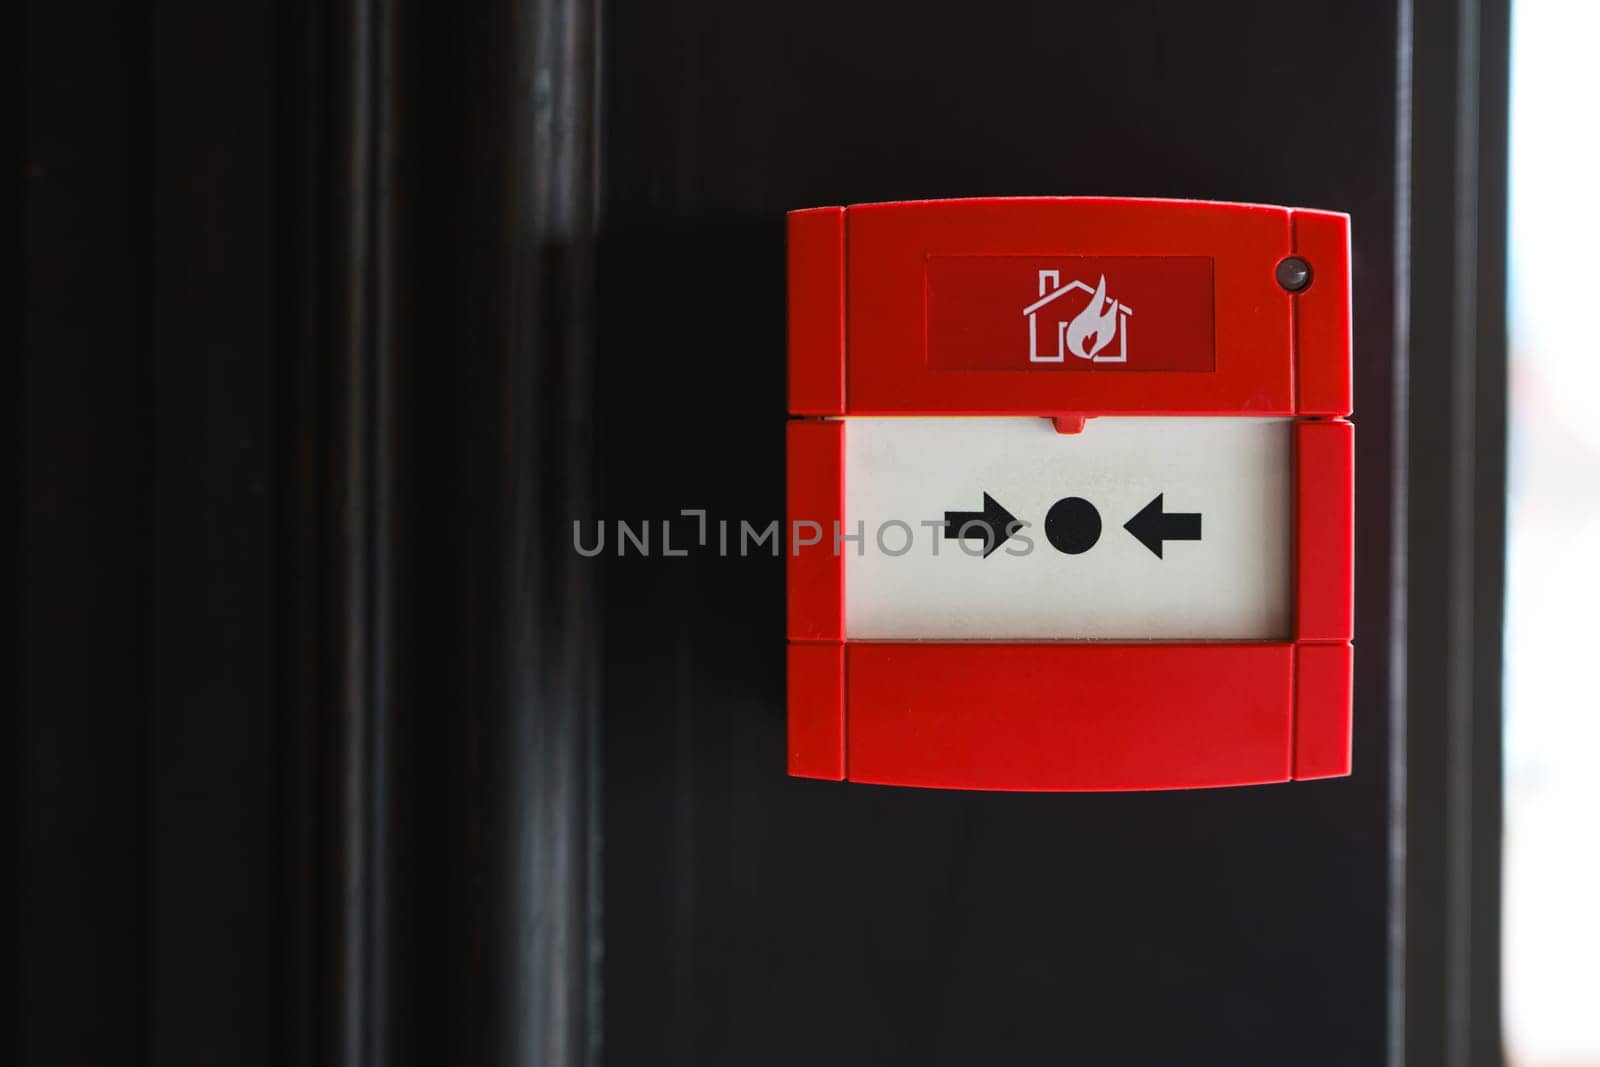 Full front view of outdoor wall mounted fire alarm button